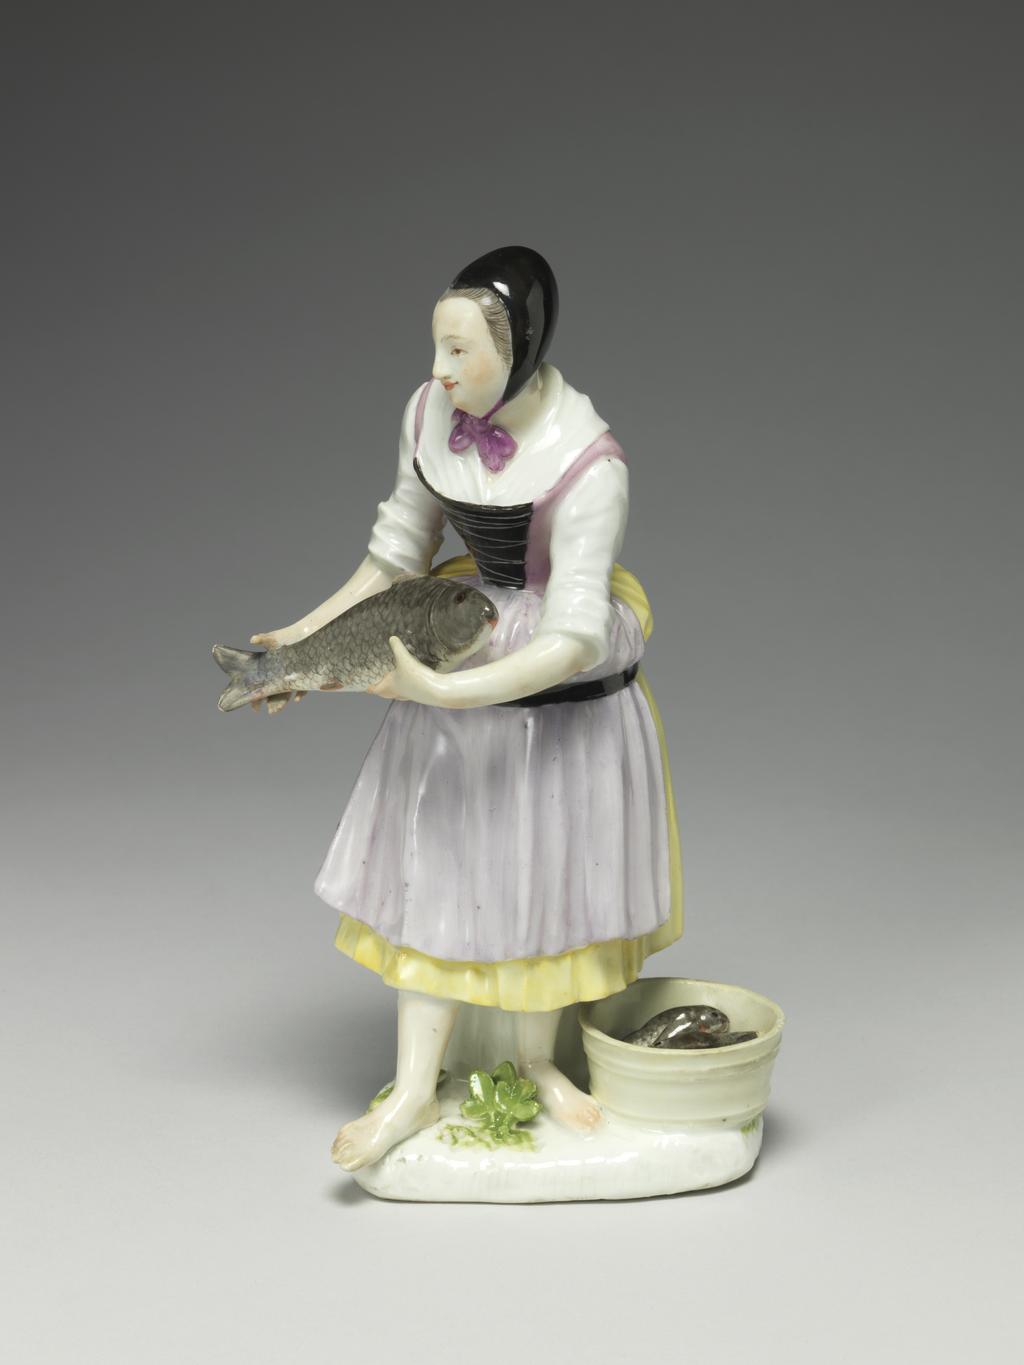 An image of Girl selling carp. Meissen Porcelain Manufactory, Saxony. Hard-paste porcelain, press-moulded, and painted in enamels. The flat underside is unglazed and has a circular ventilation hole near the back. Height, whole, 18.6 cm, width, whole, 11.2 cm, circa 1740-1745. Production Note: The figure was modelled by J.J. Kaendler after 'Carpe Vive' the 6th print in the second series of engravings entitled 'Études prises dans le bas Peuple ou les Cris de Paris' engraved by the comte de Caylus (1692-1765) after drawings by Edmé Bouchardon (1689-1762), which were published in 1737.